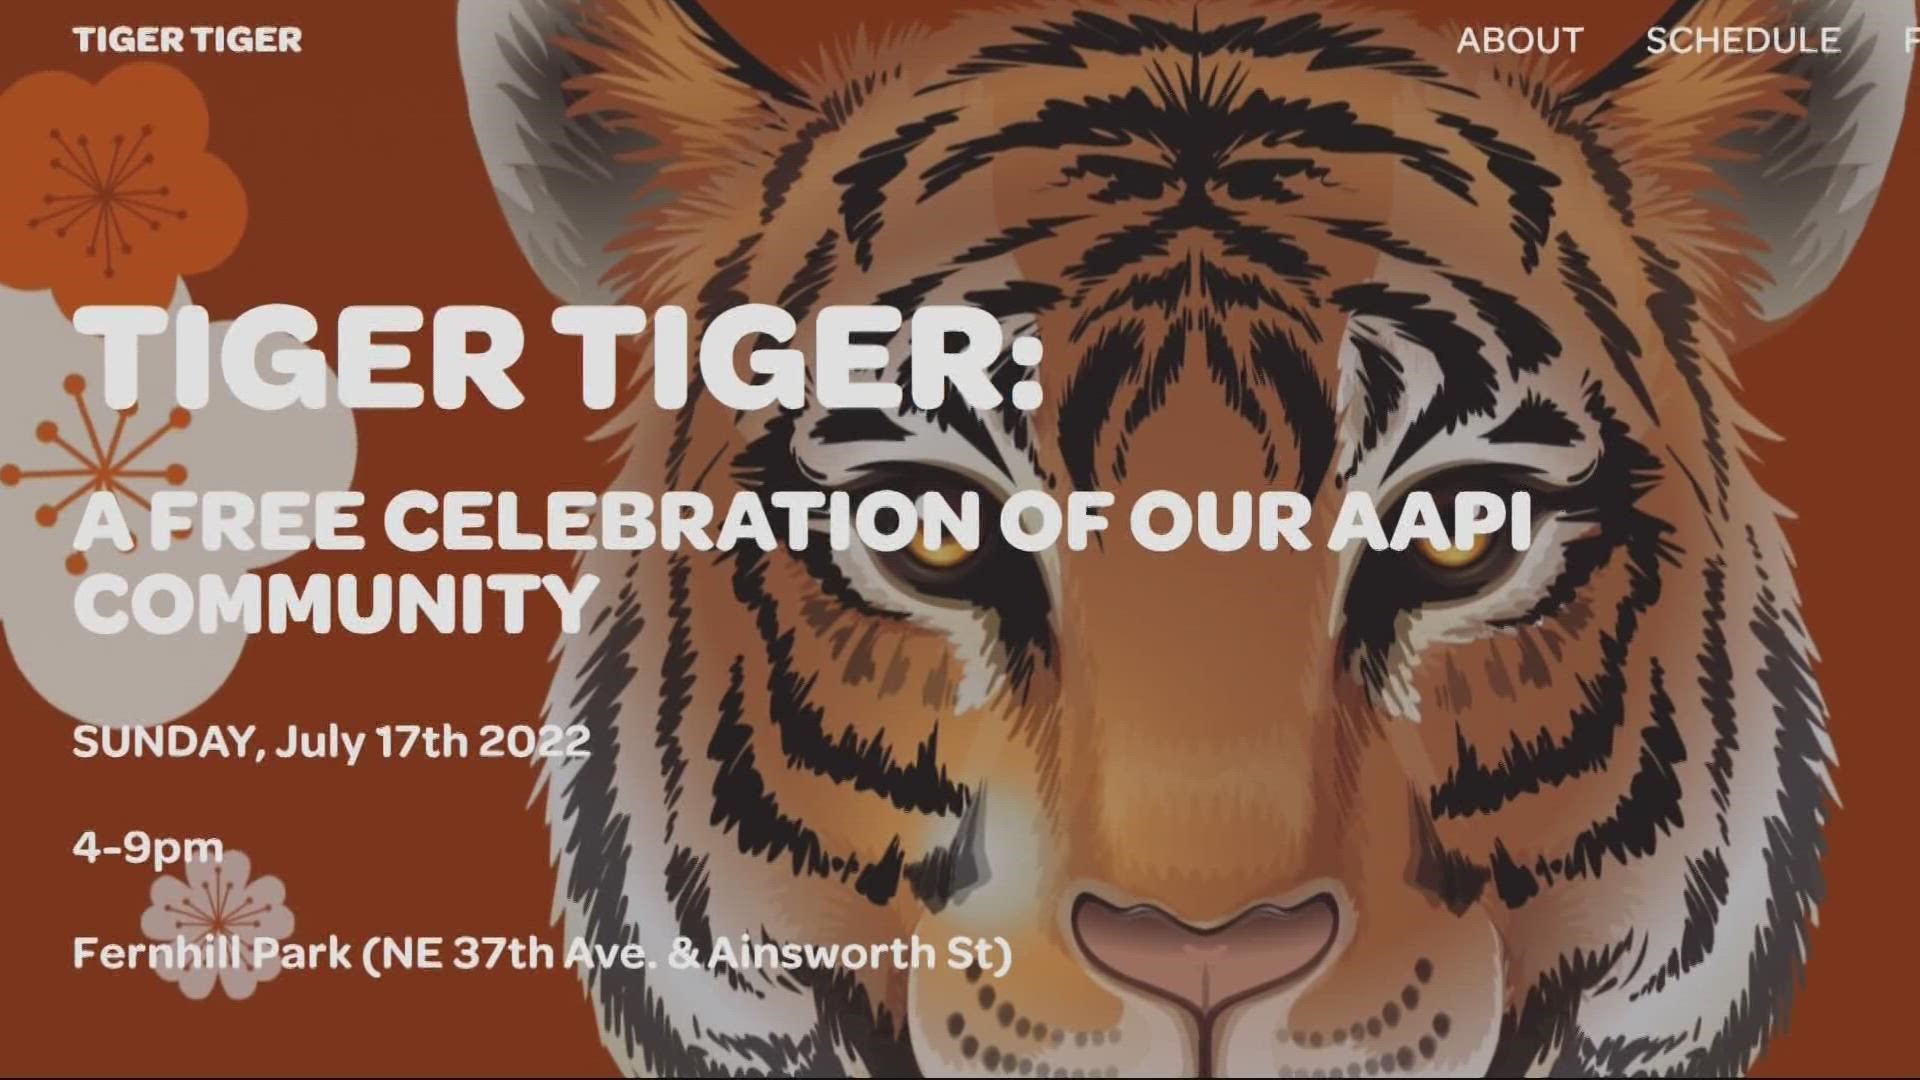 There have been two incidents of anti-Asian attacks or harassment so far in July. An event called “Tiger Tiger PDX” is planned to push back on hate.